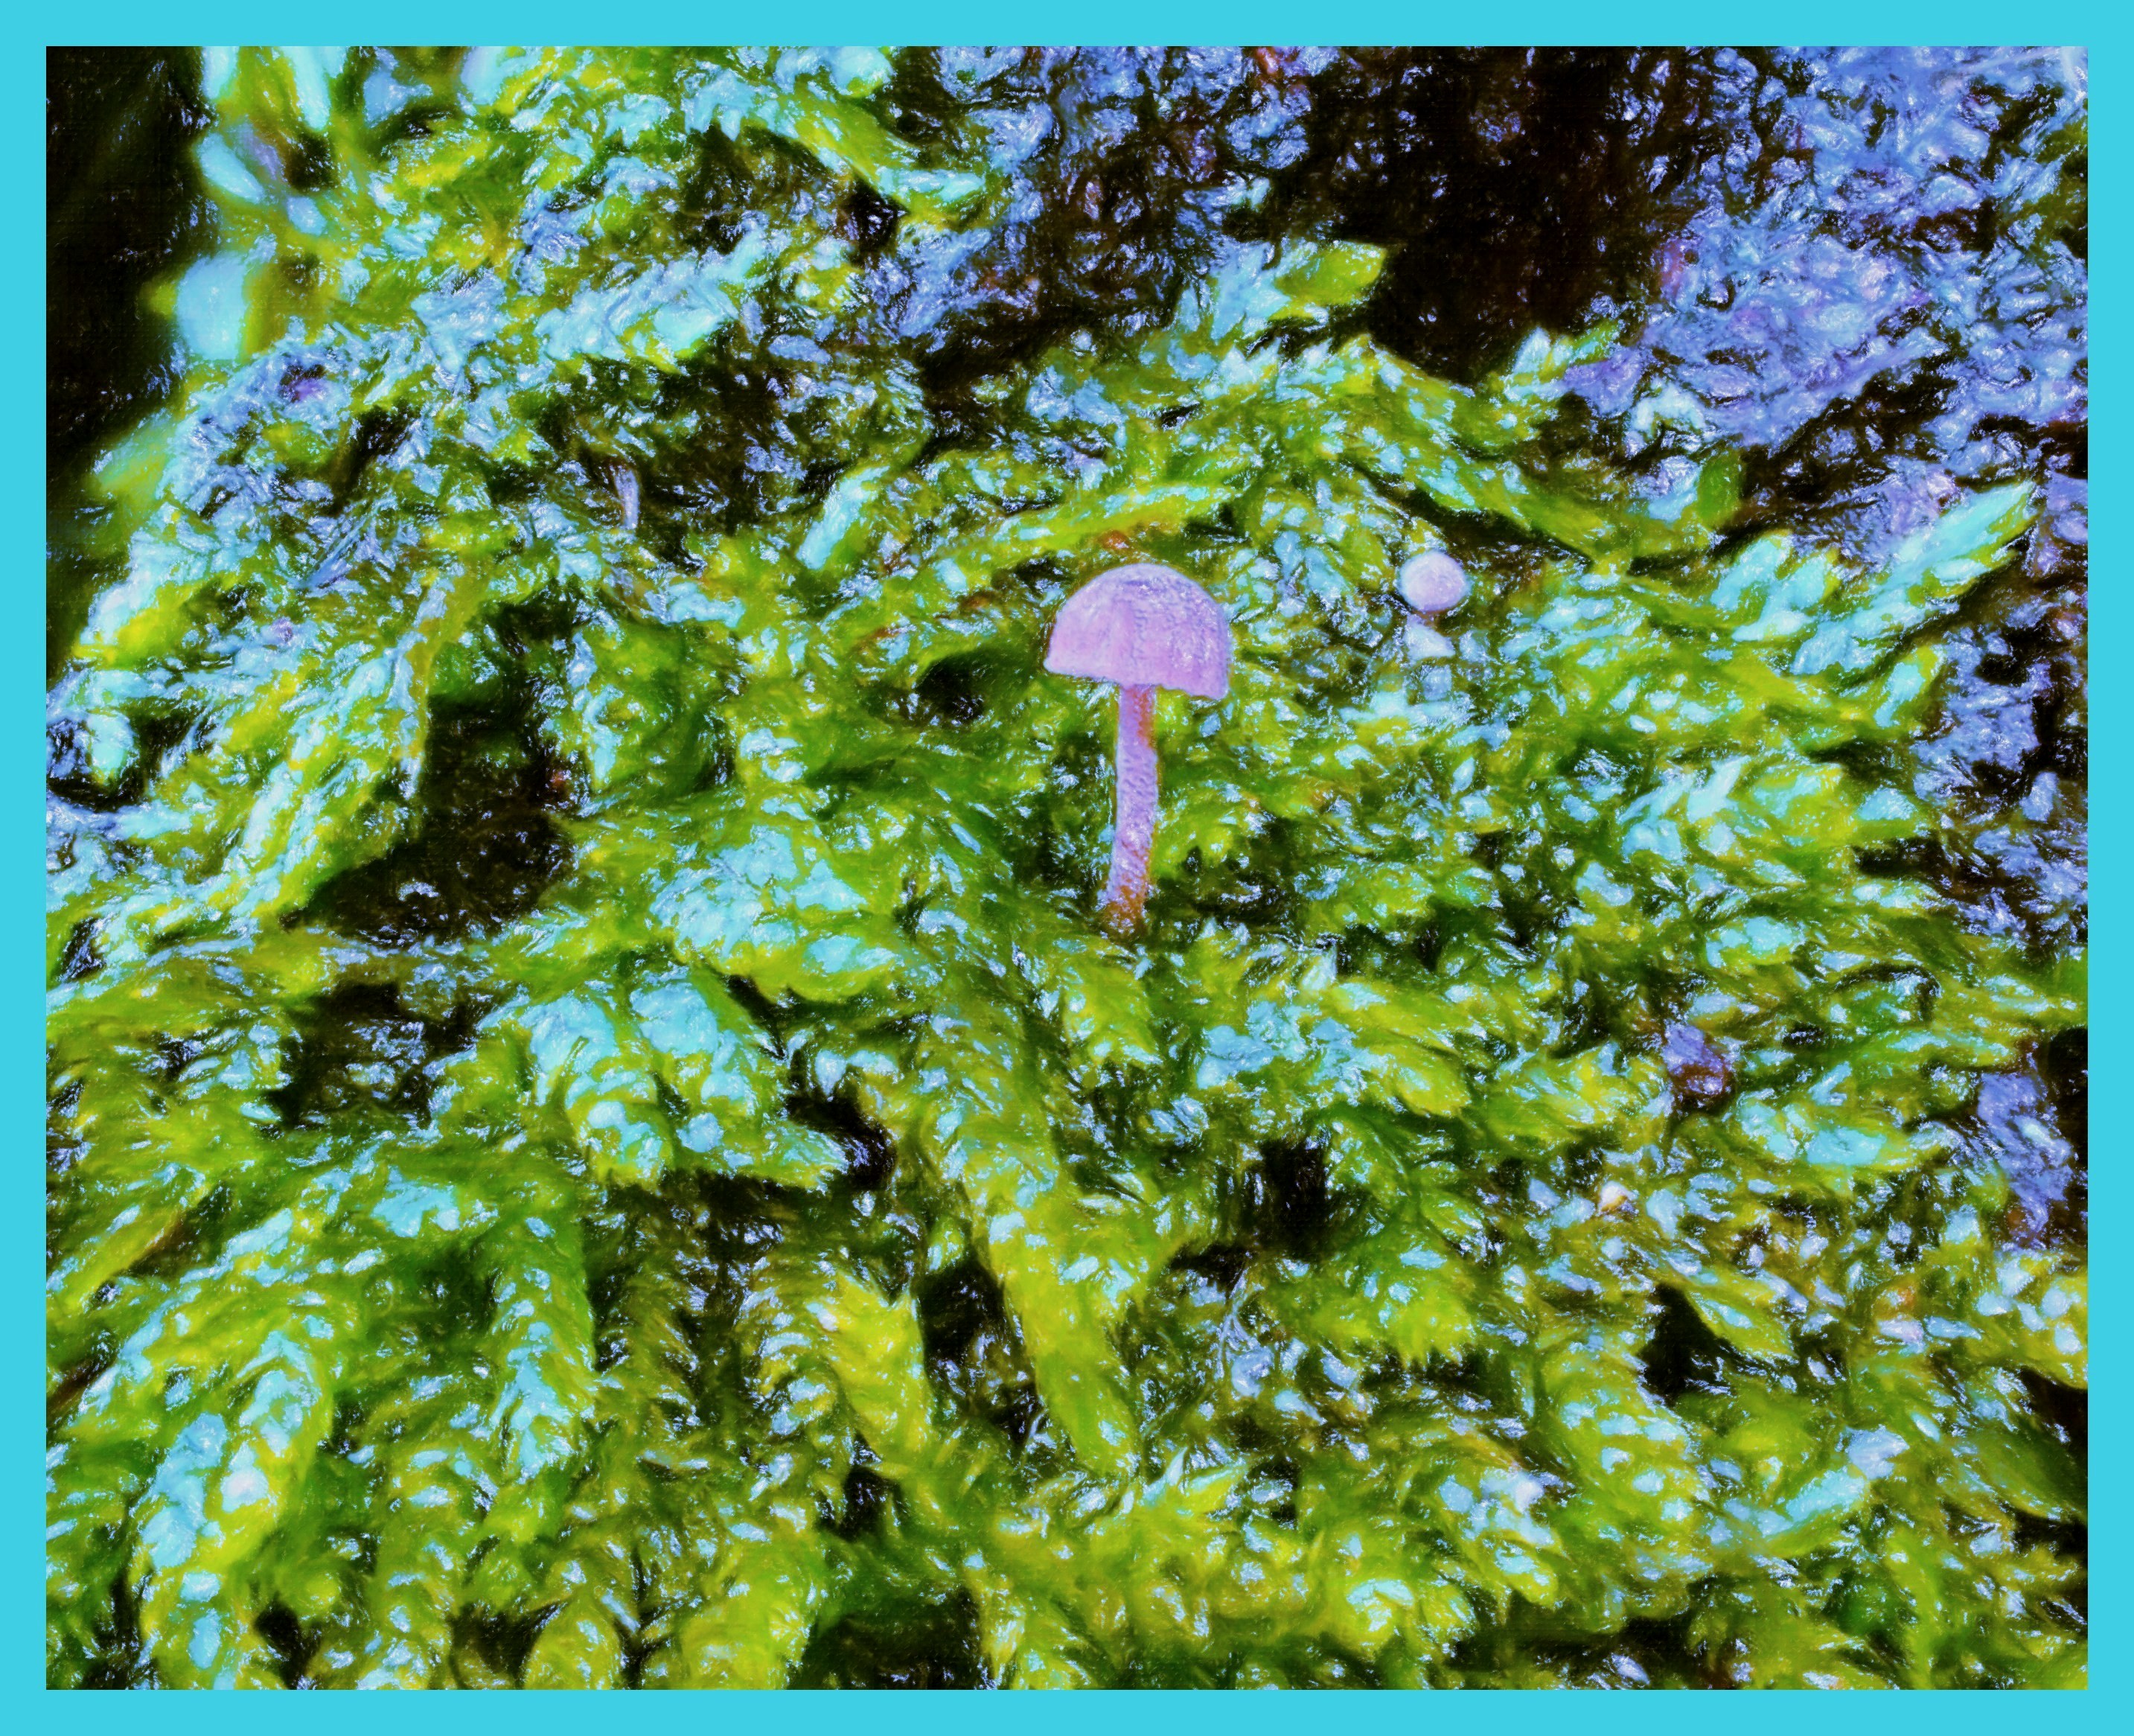 Micro-mushrooms in Moss. (2) Photo by Thomas Peace c. 2015